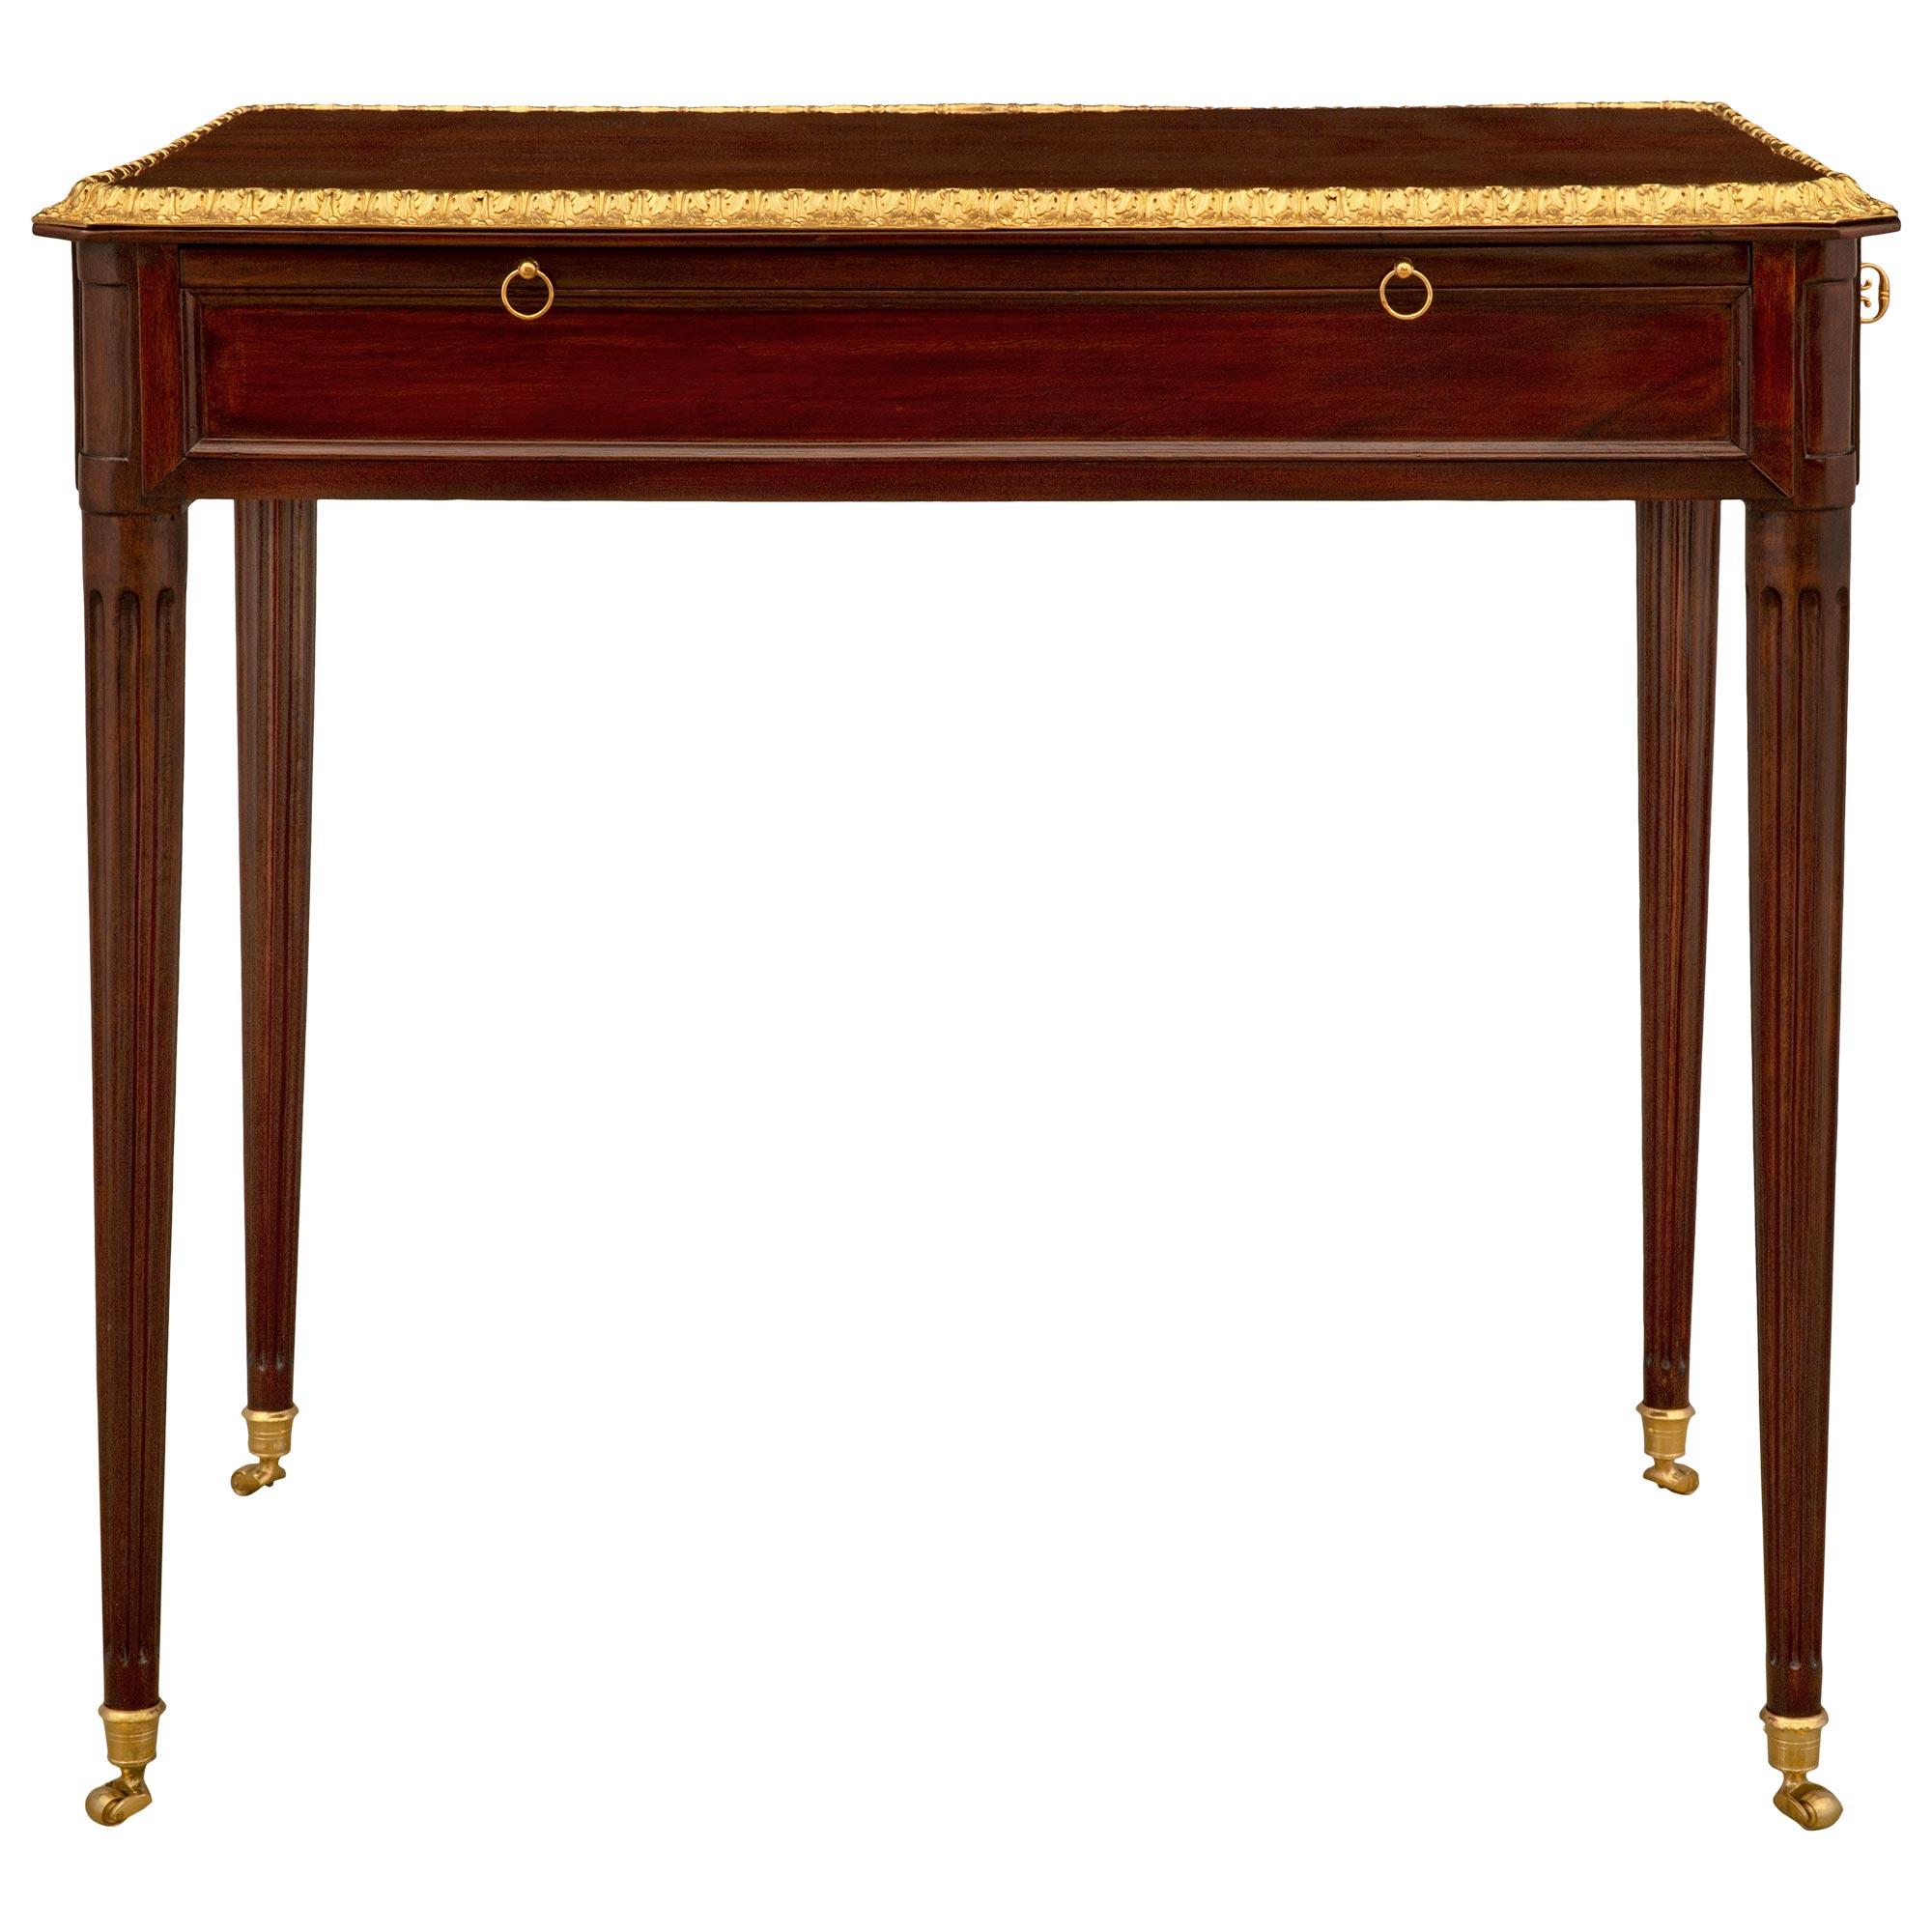 French 18th Century Louis XVI Period Mahogany and Ormolu Side Table / Desk For Sale